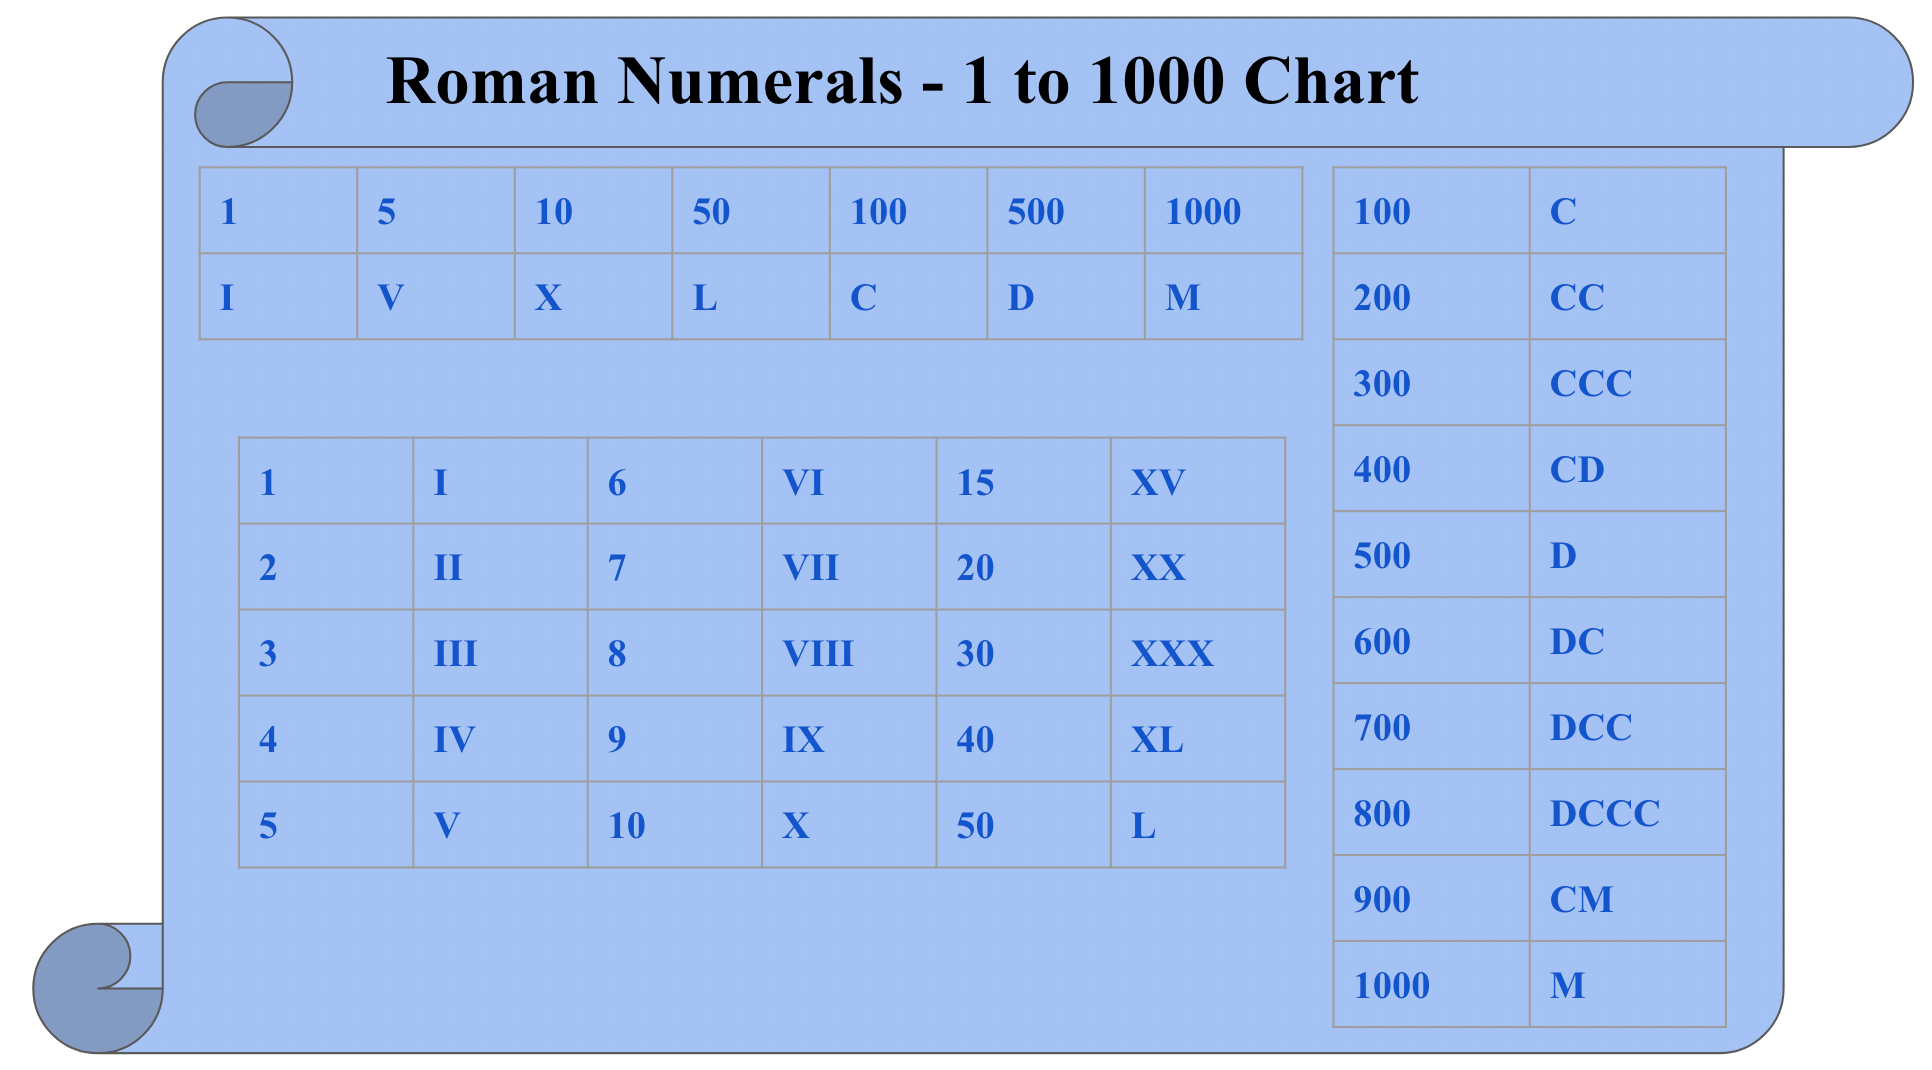 Roman Numerals - List of Roman Numerals from 1 to 1000, Rules & Chart